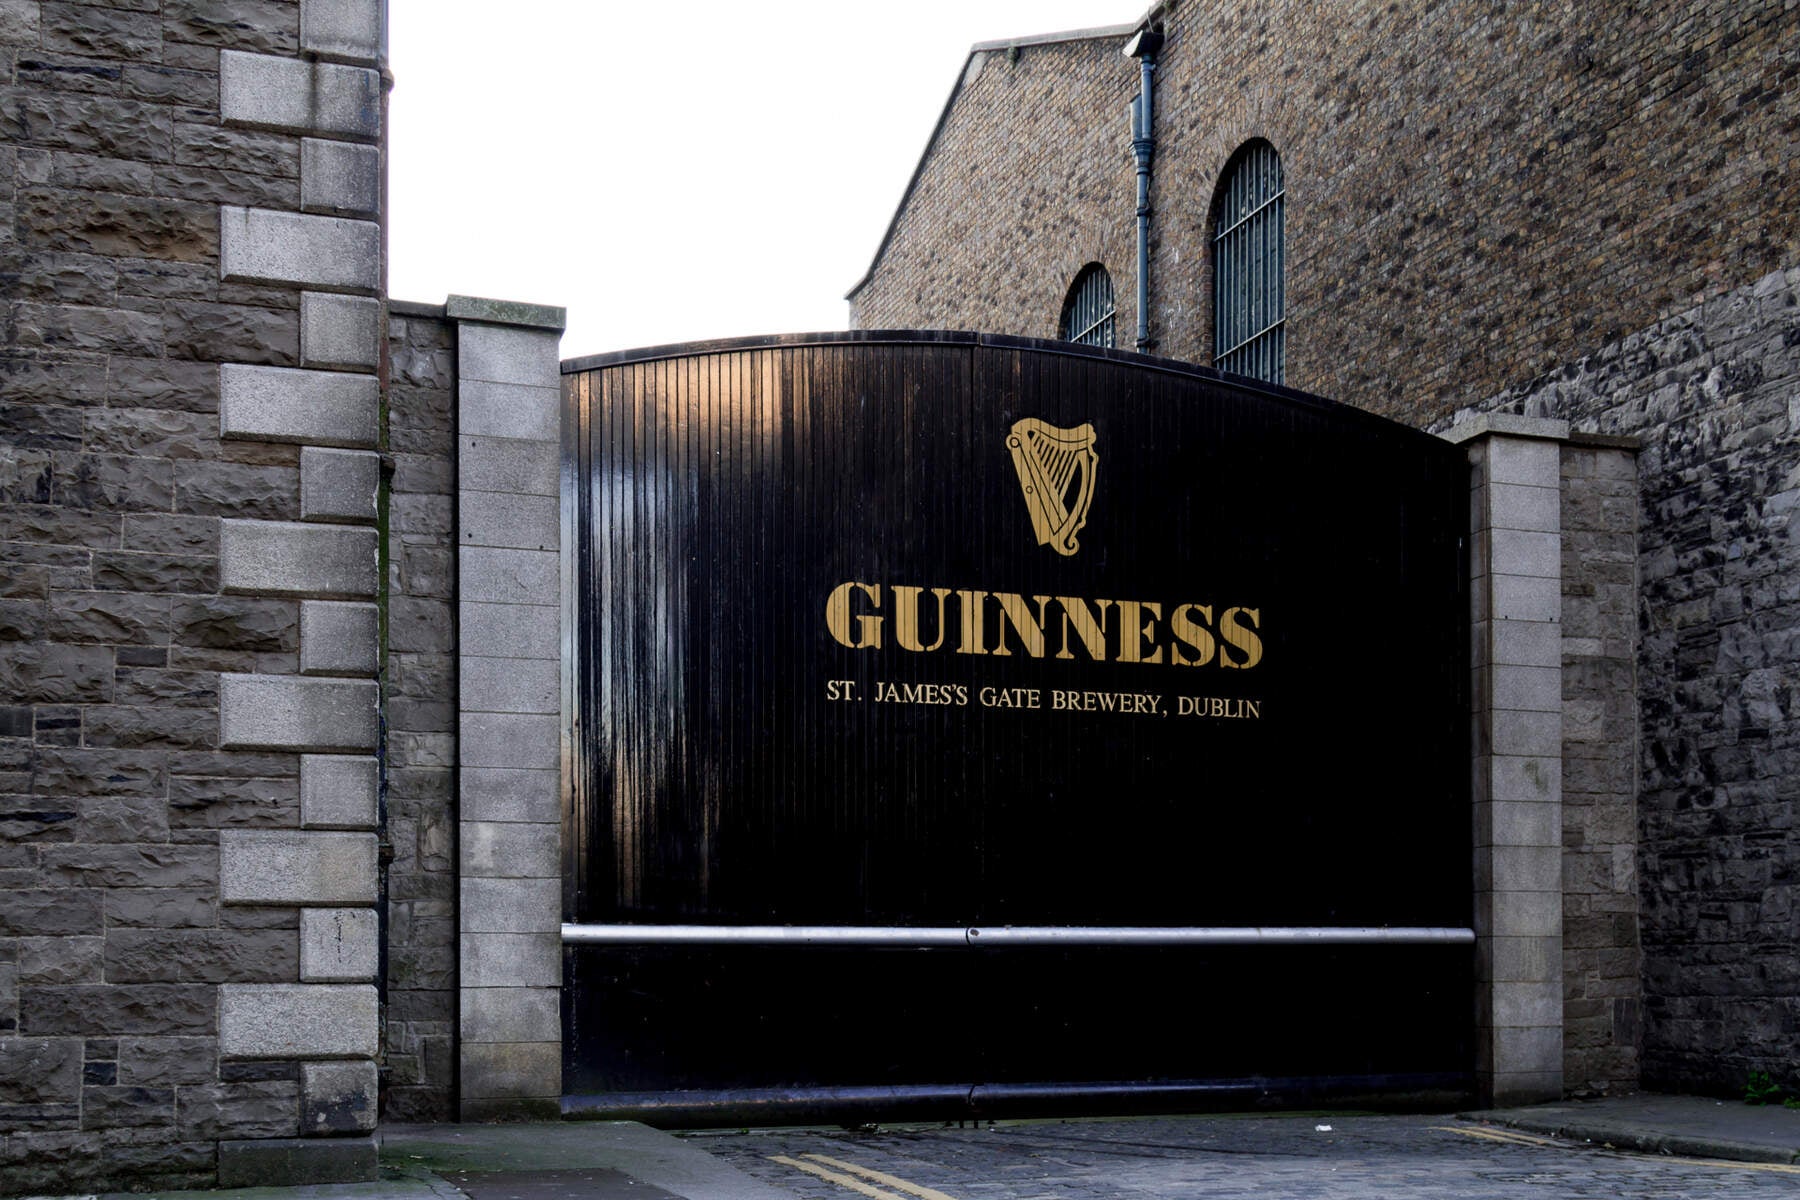 Image of black gates at the Guinness Brewery in Dublin.